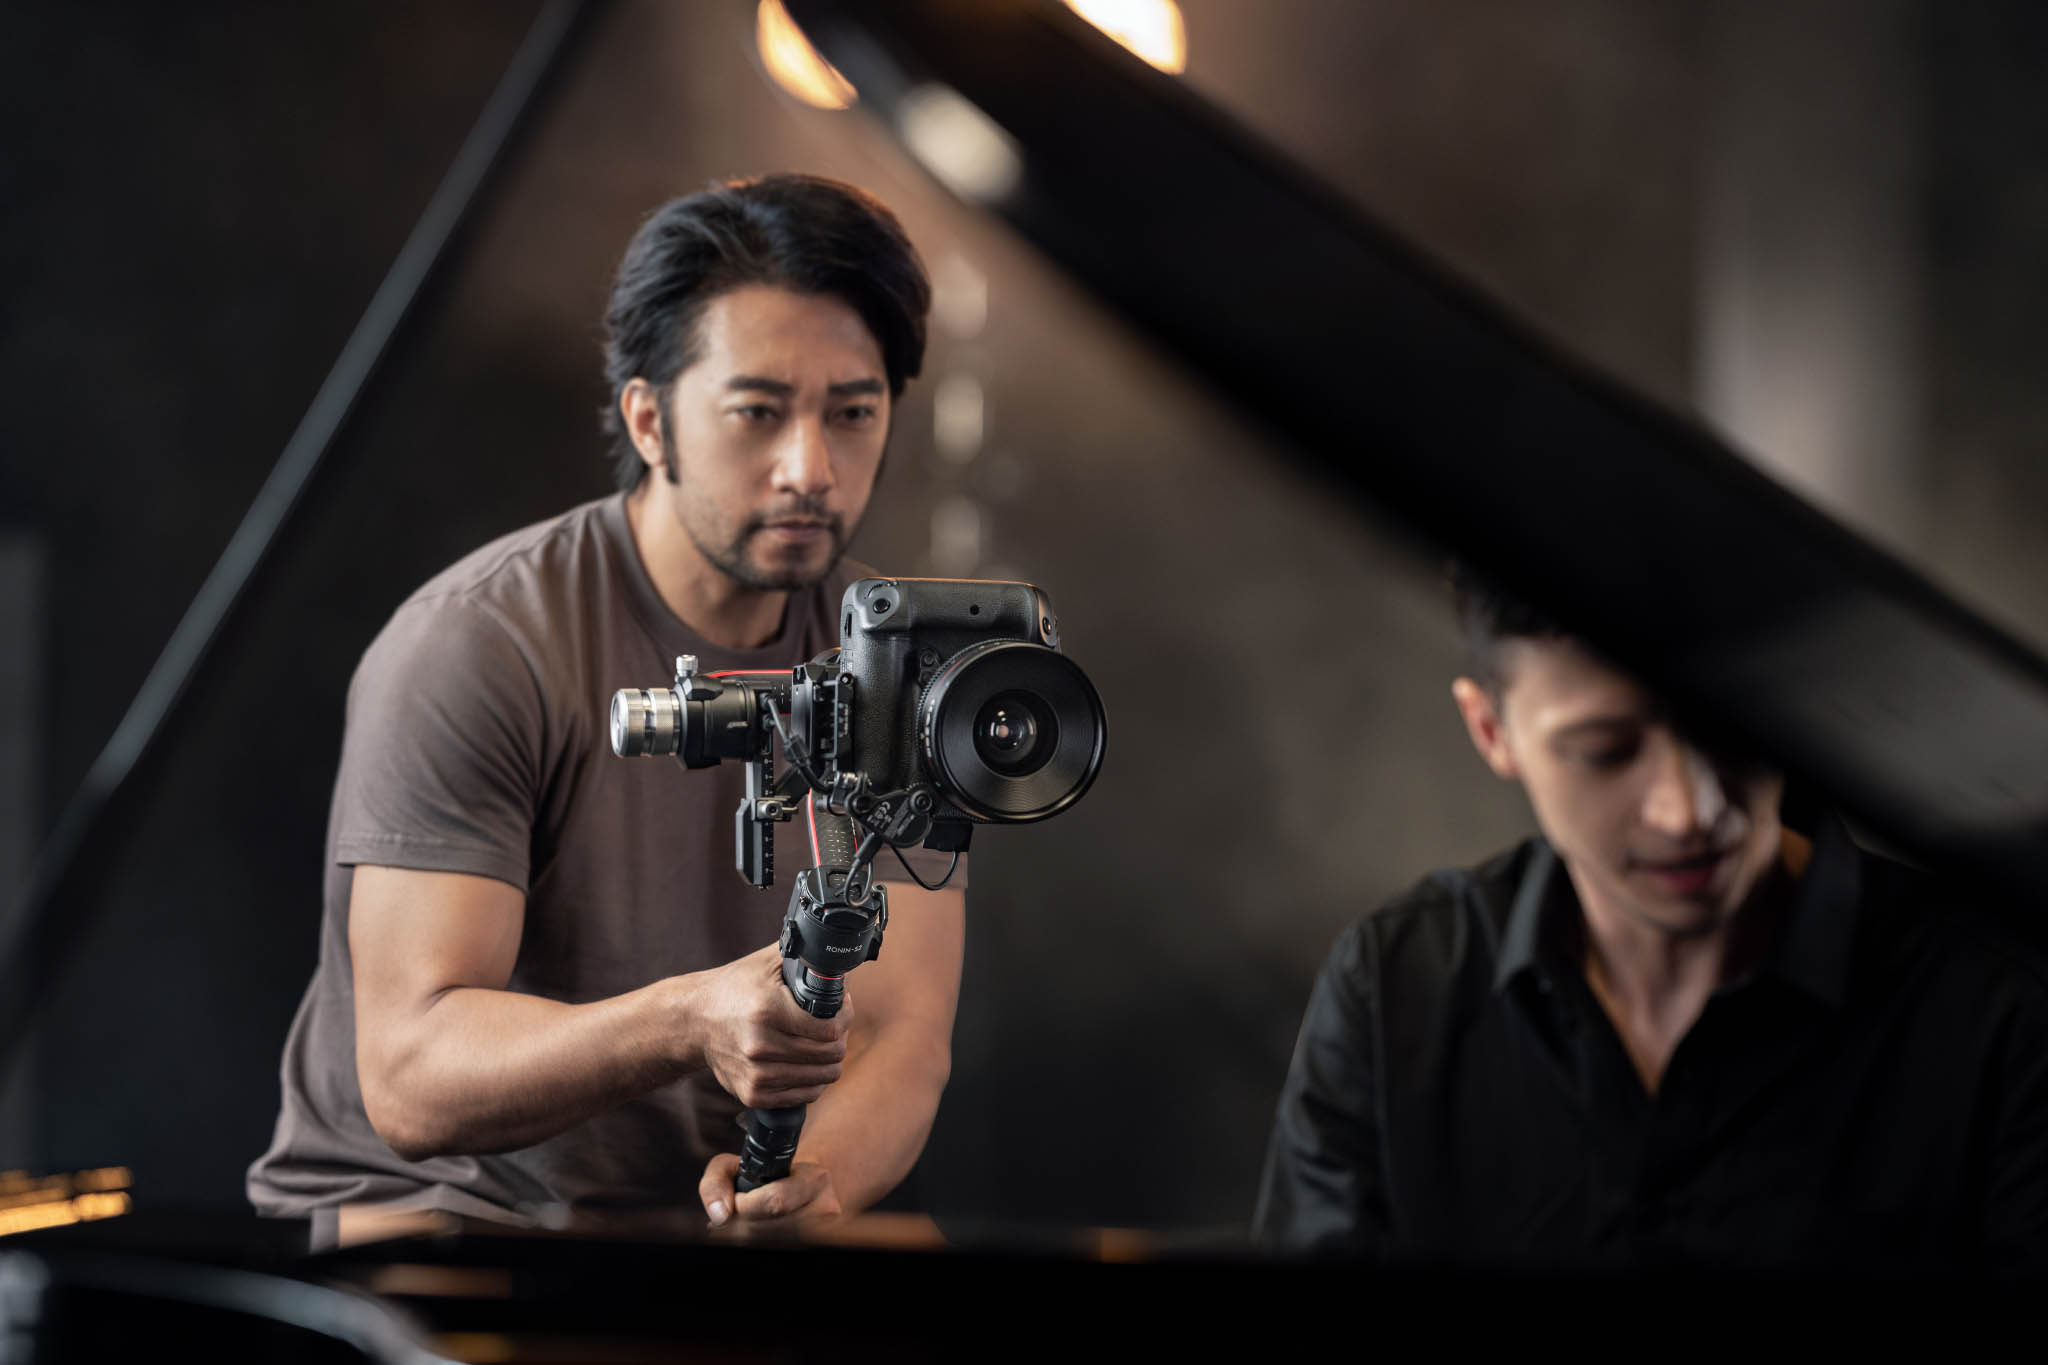 DJI’s Ronin Series Grows Stronger, Lighter, And Smarter With New DJI RS 2 And RSC 2 Gimbals